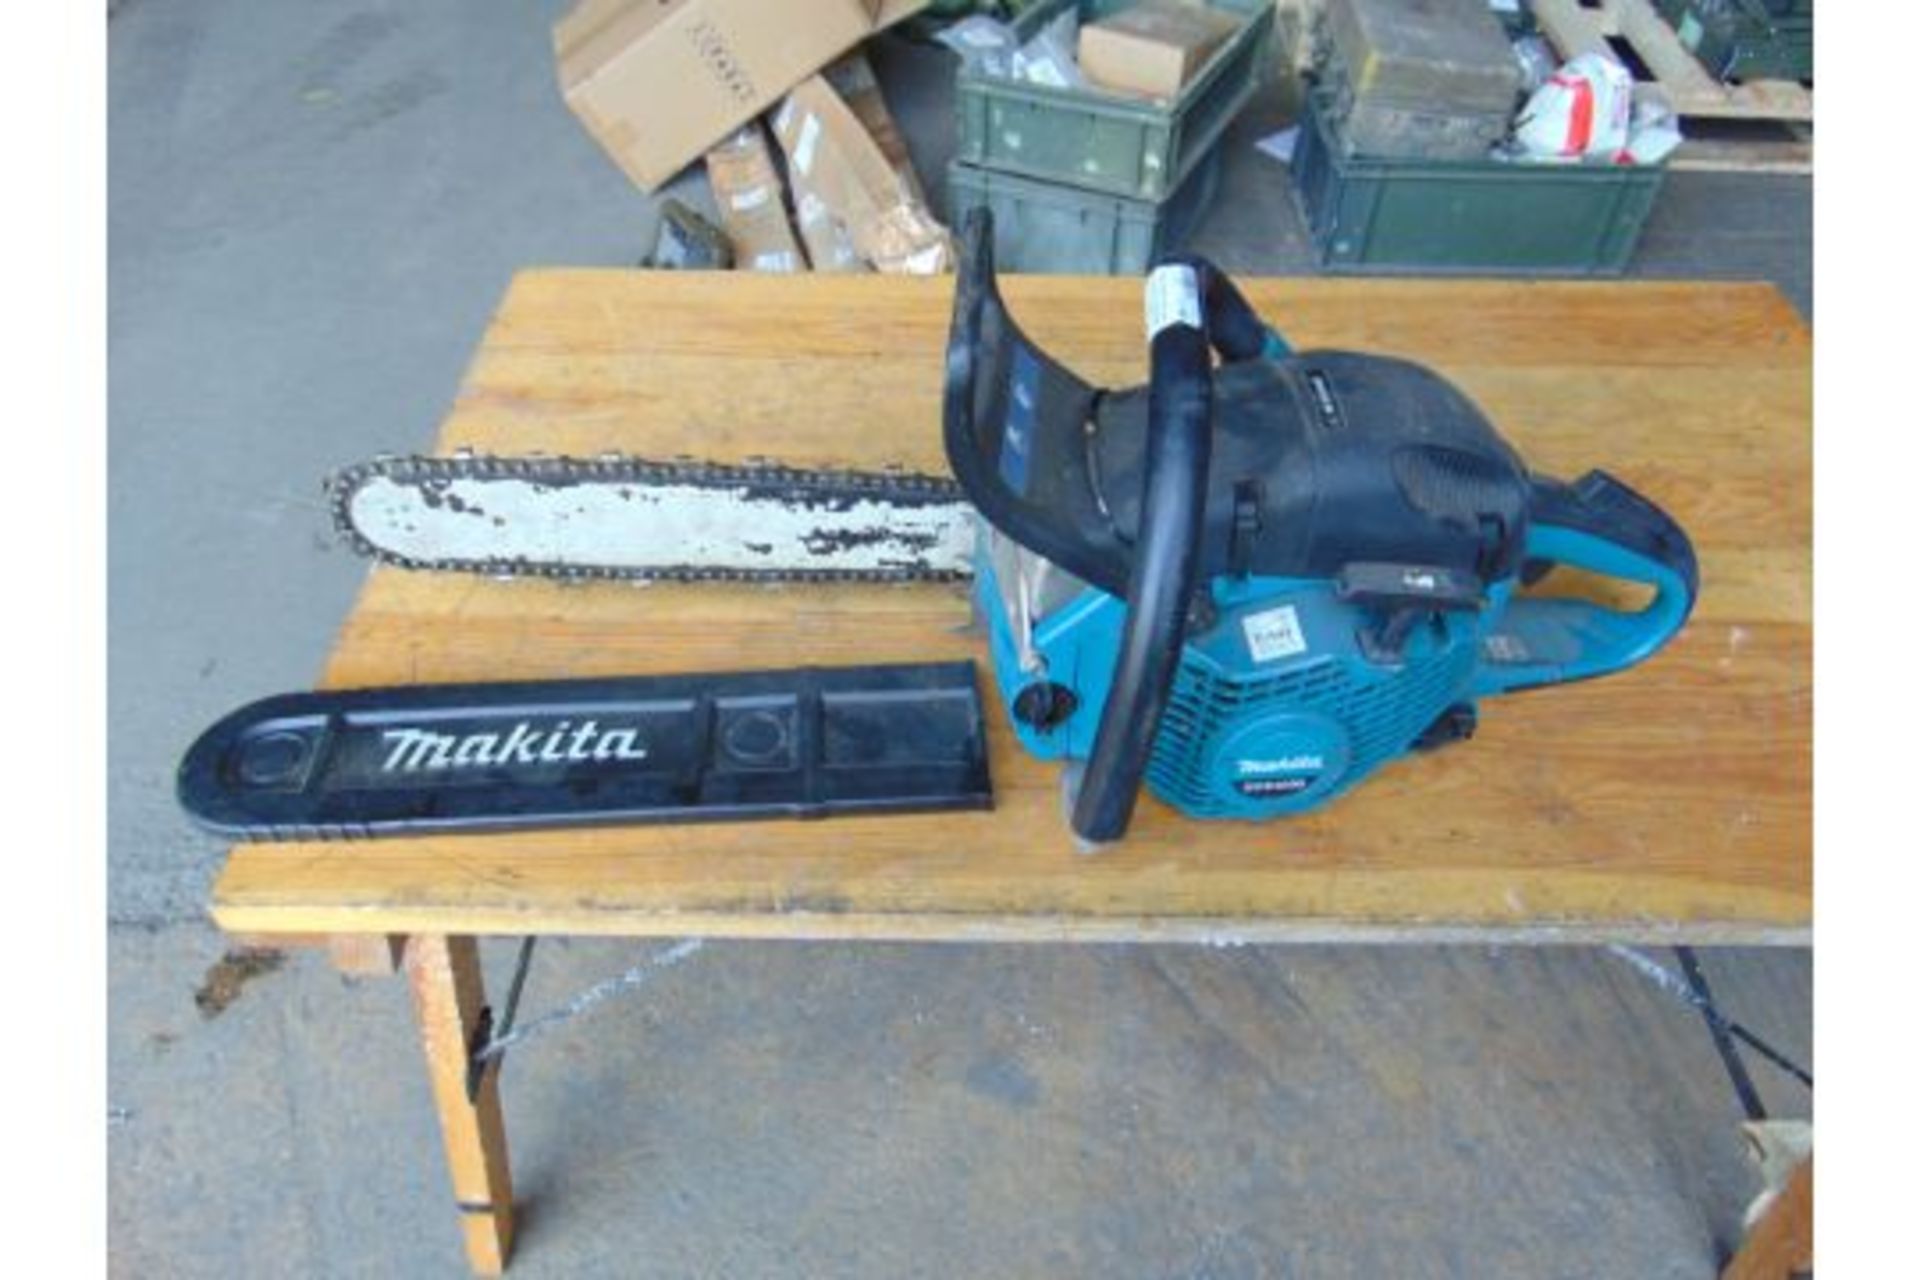 MAKITA DCS 5030 50CC Chainsaw c/w Chain Guard from MoD - Image 3 of 6